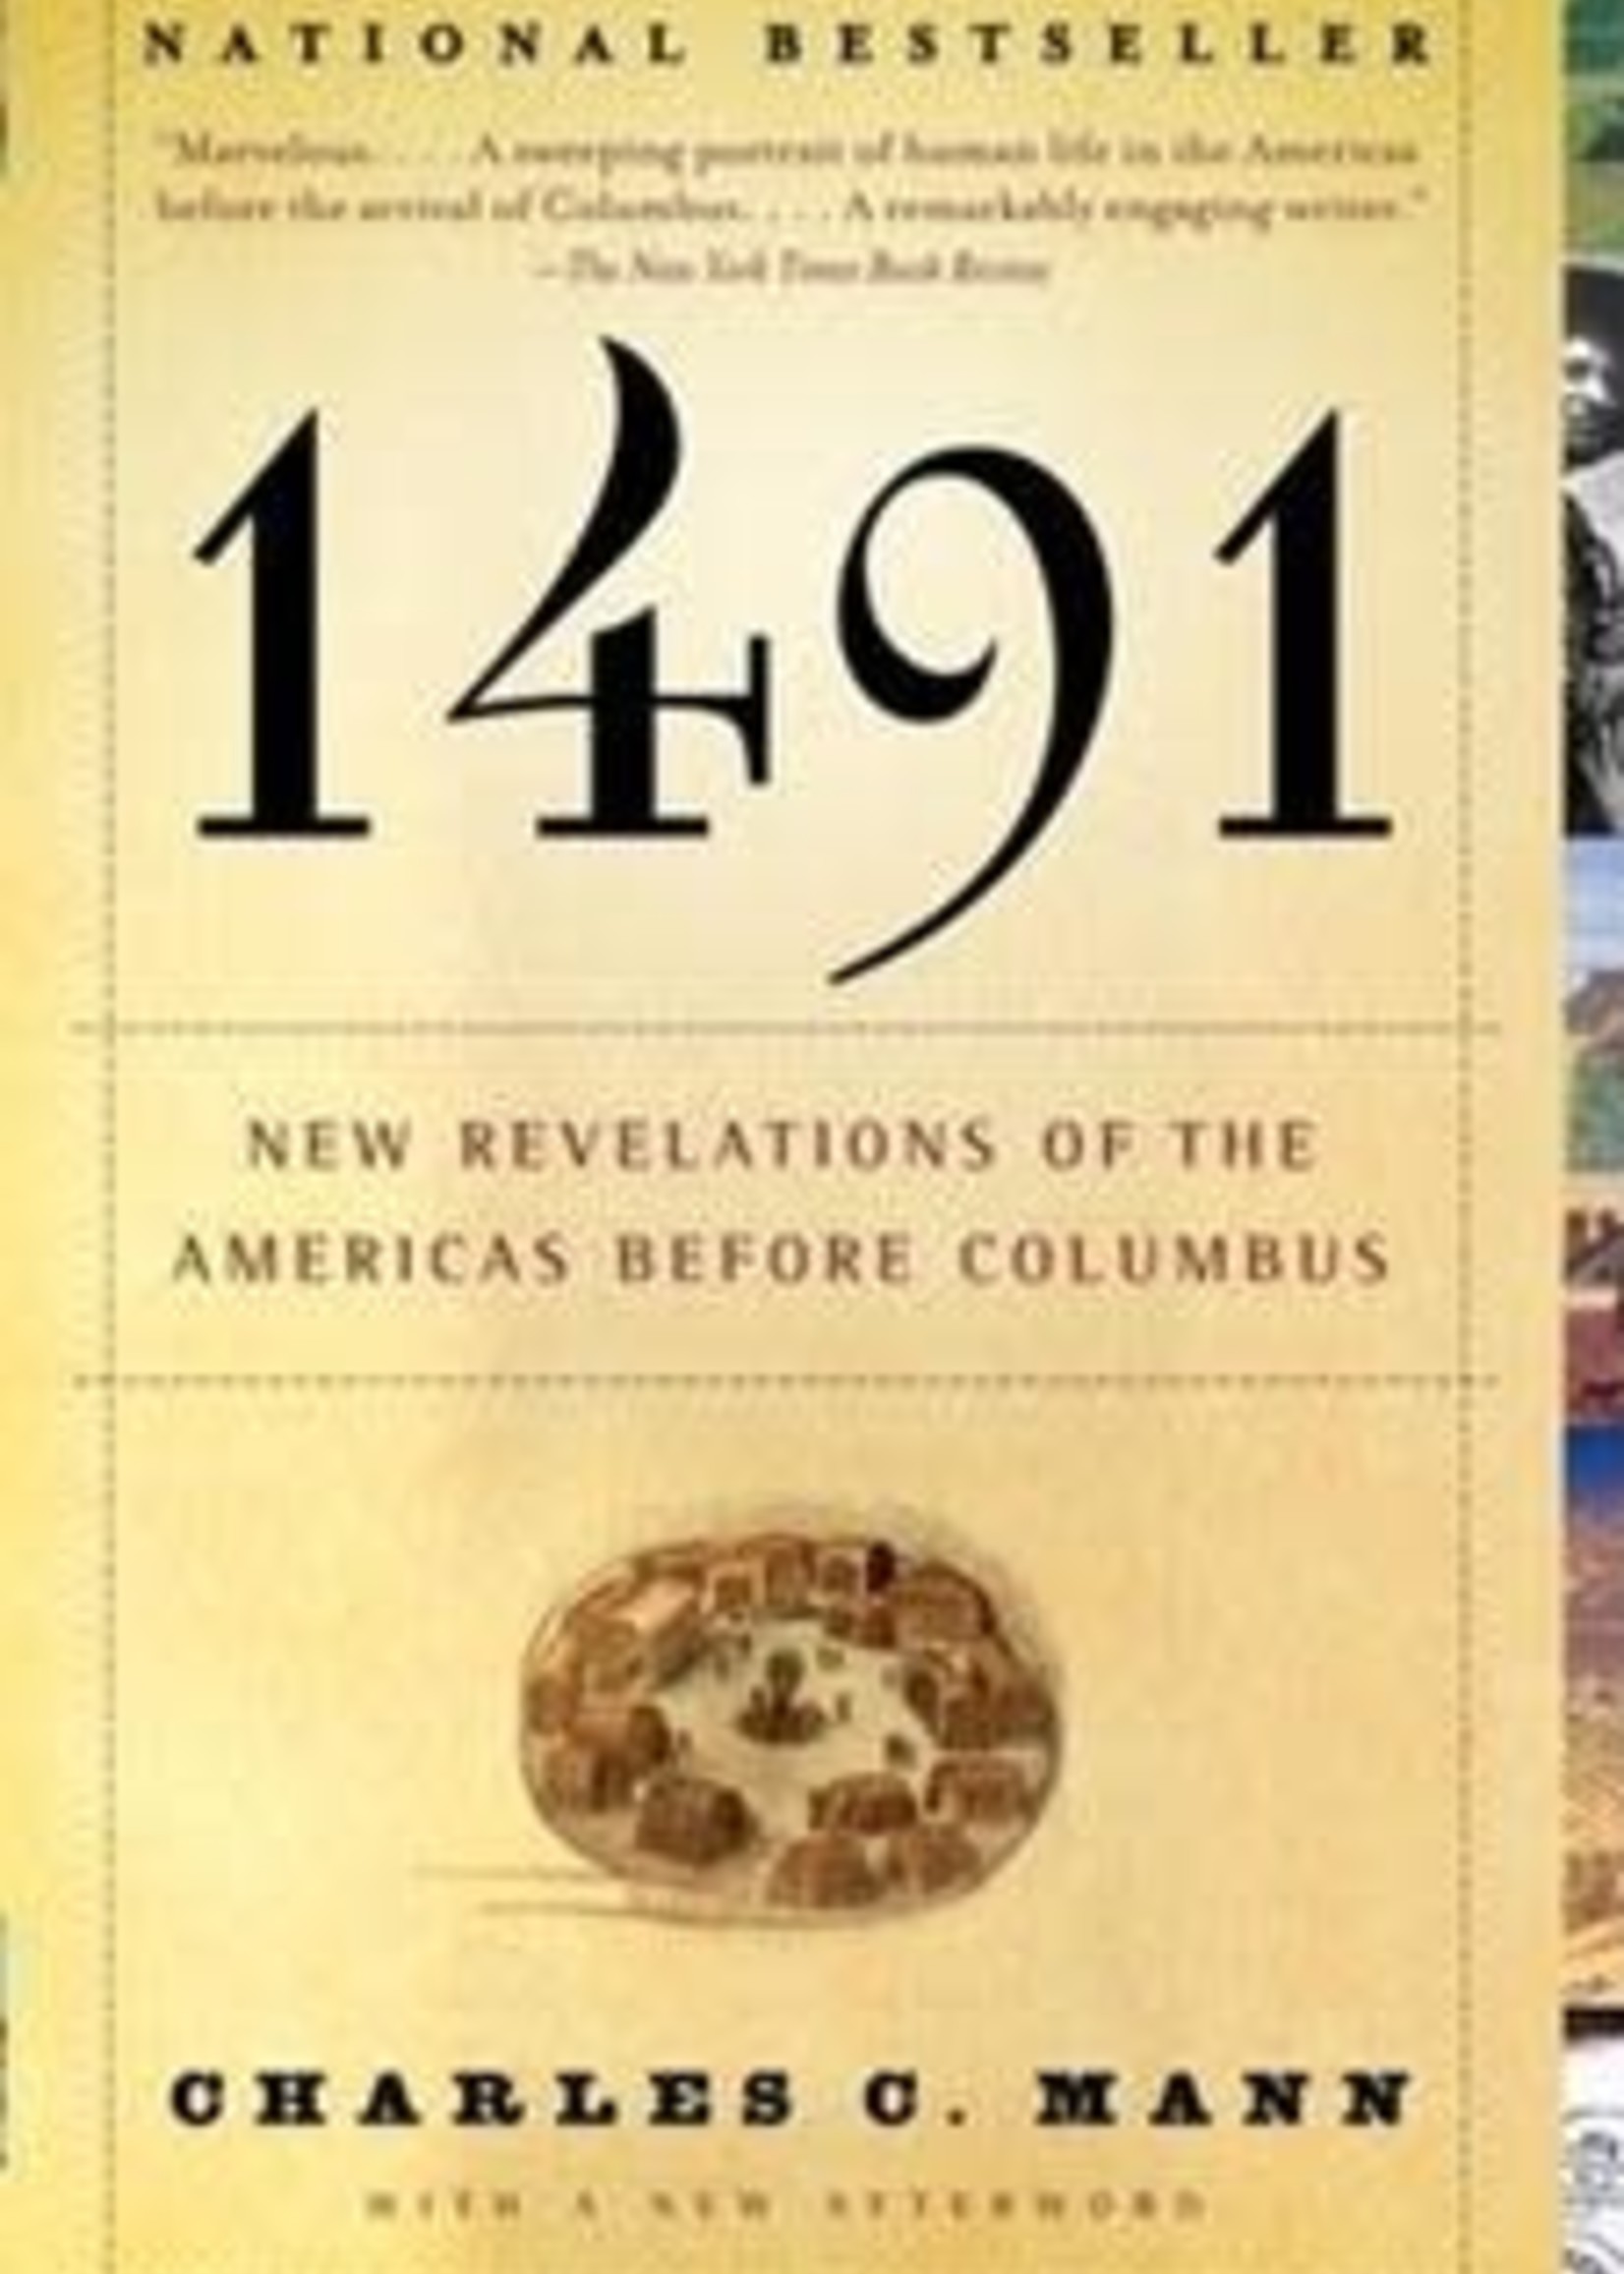 Vintage 1491 - New Revelations of the Americas Before Columbus